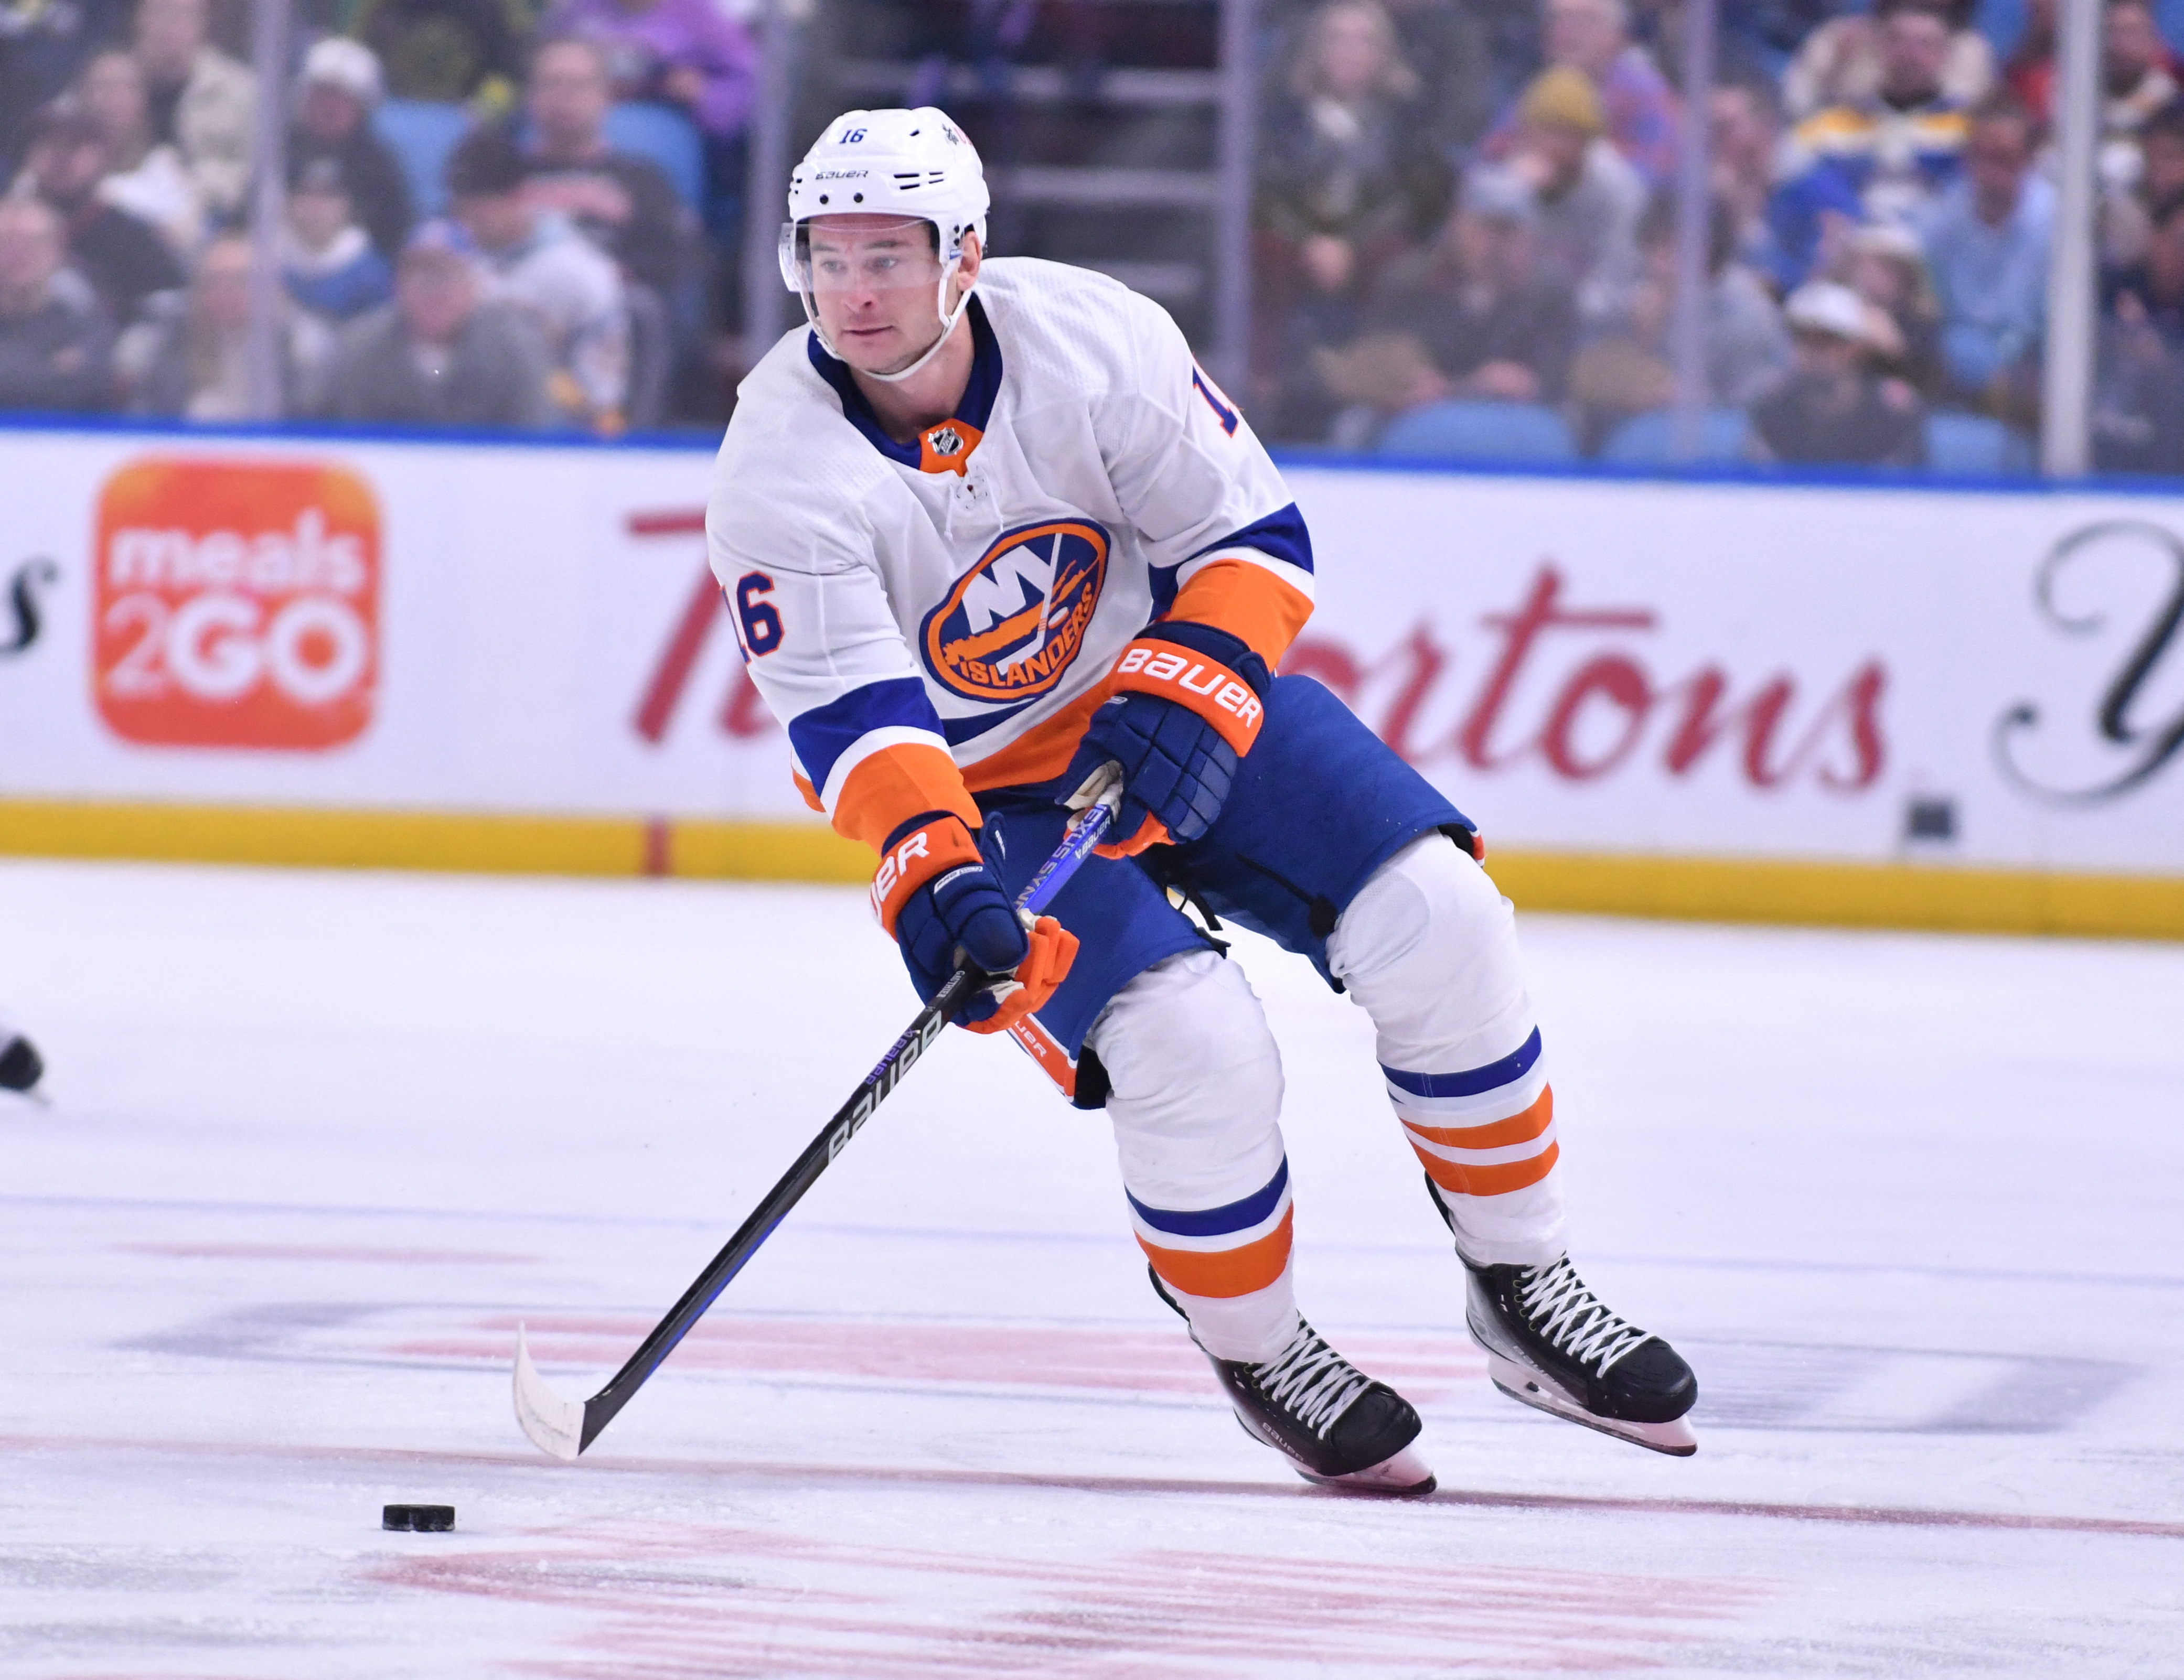 Skinner, Samuelsson and Cozens score to lead the Sabres to a 3-1 victory  over the Islanders